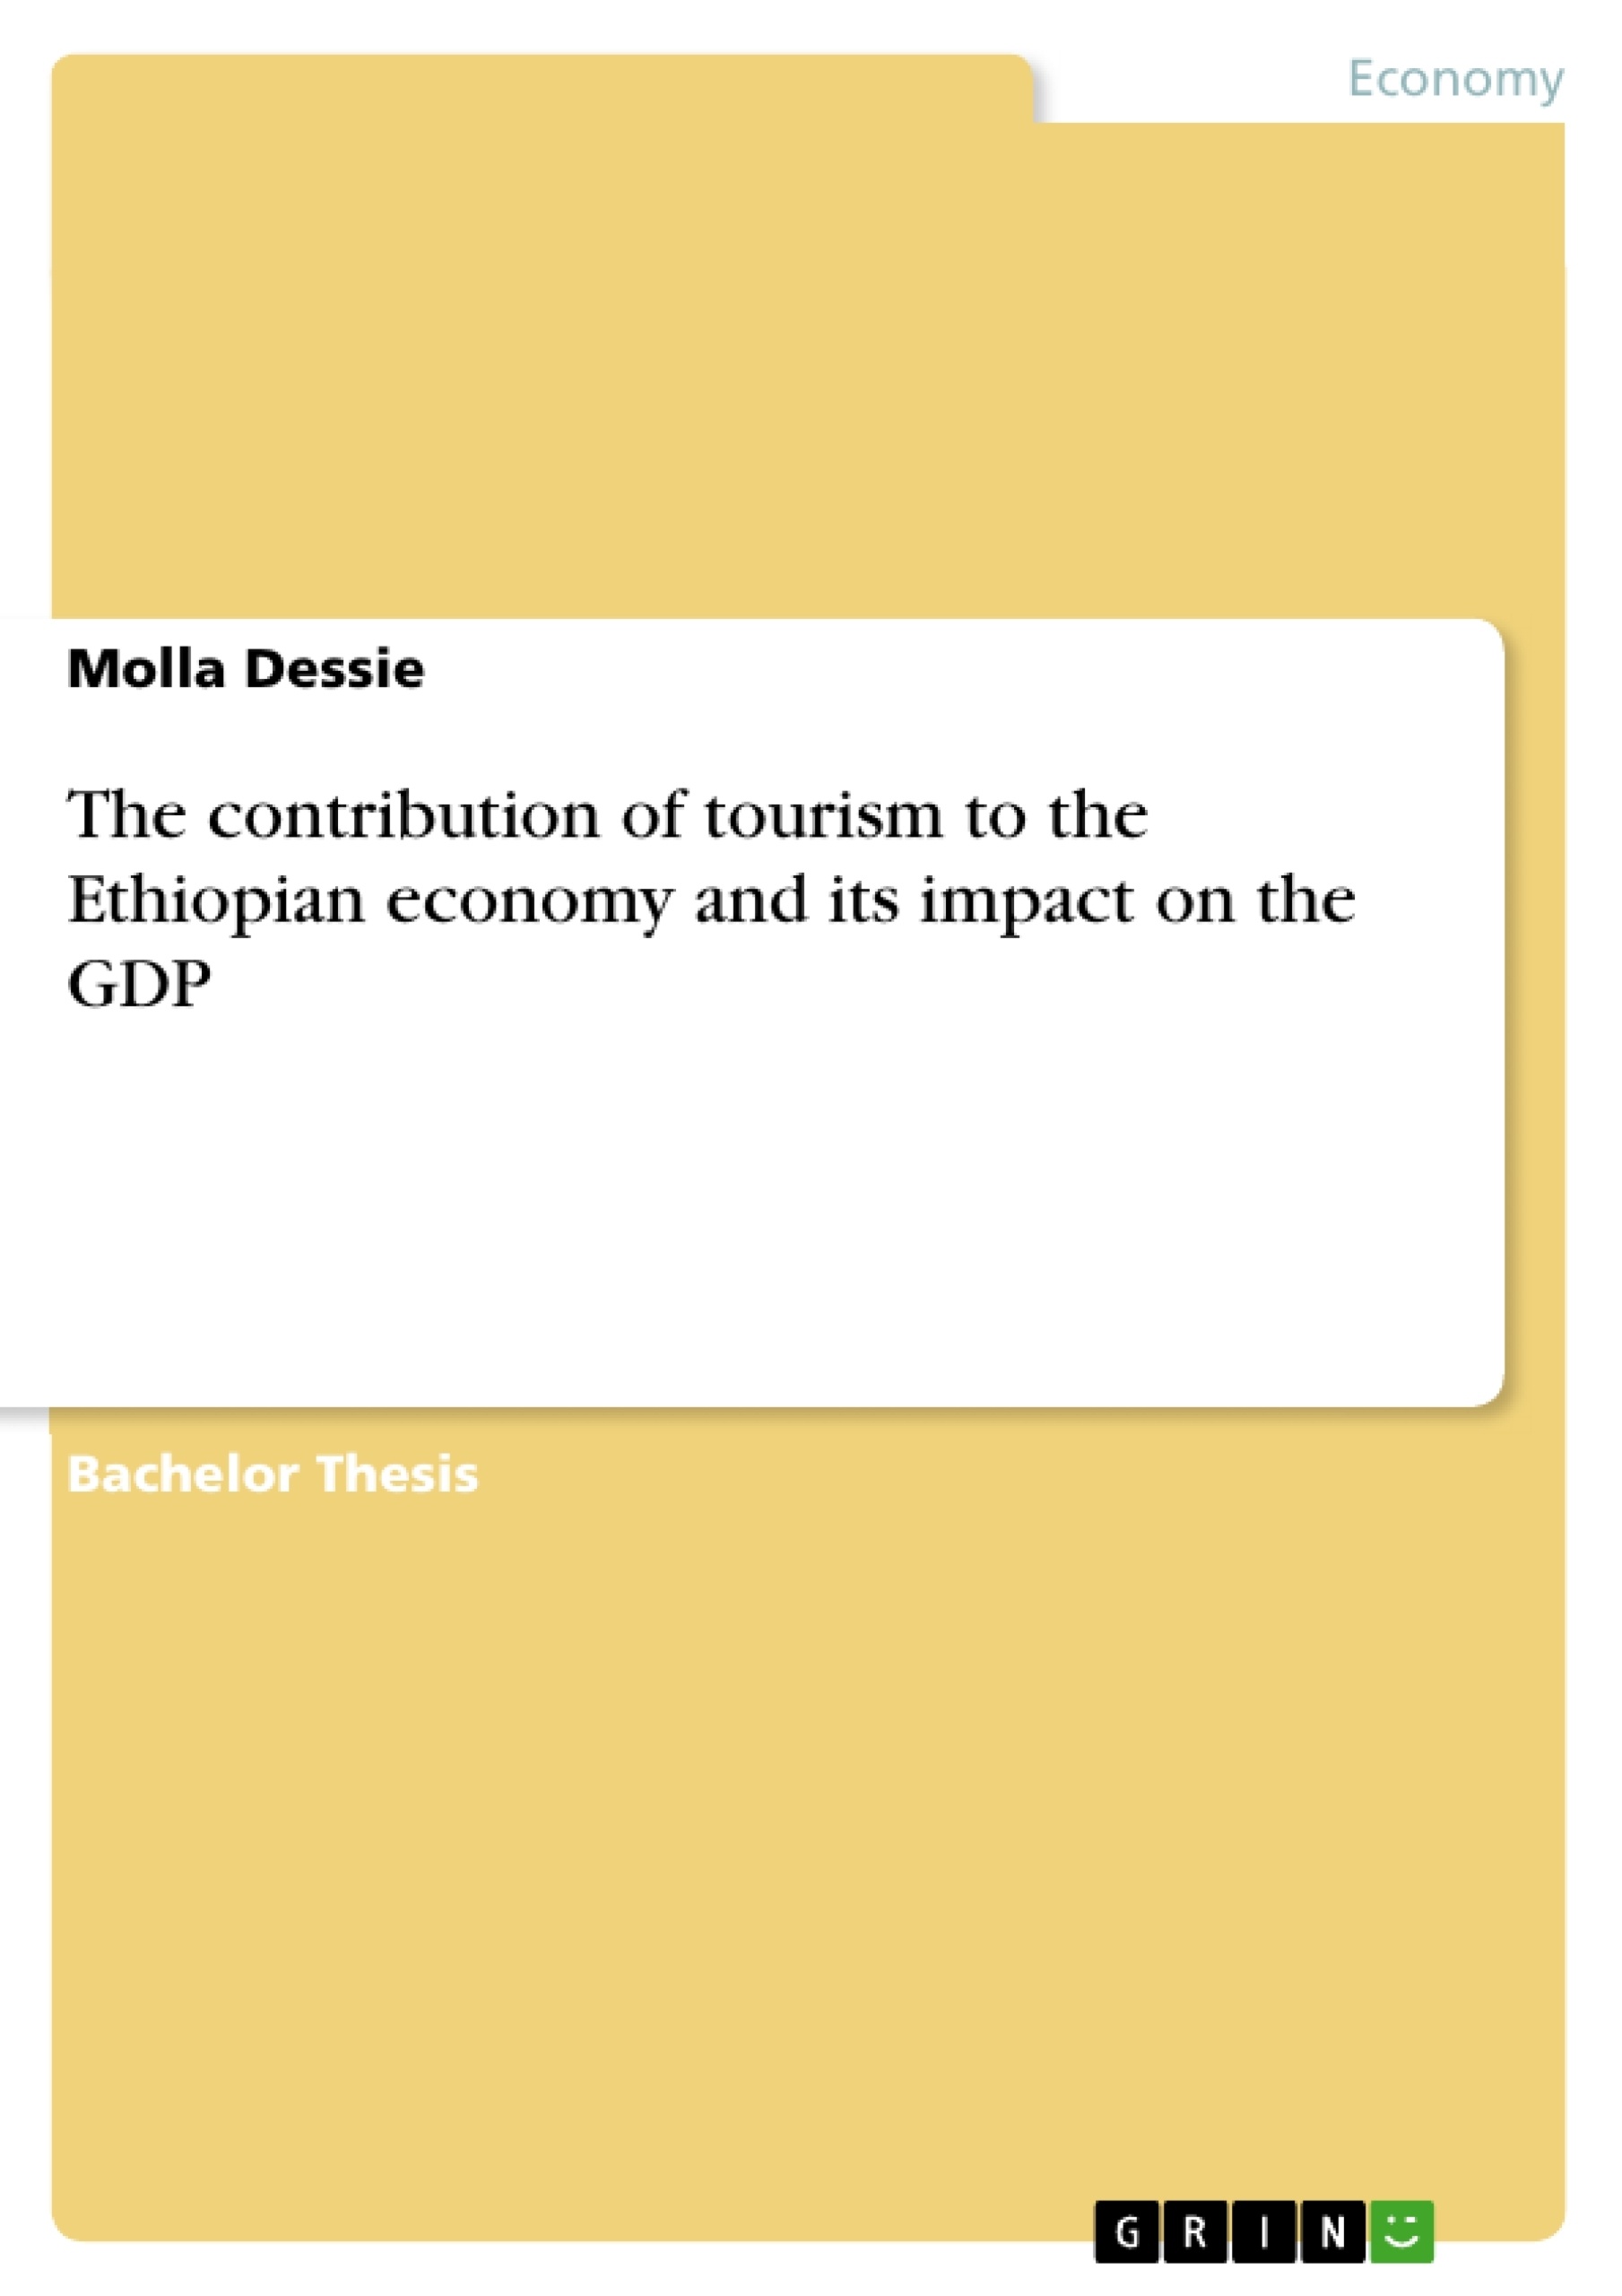 Título: The contribution of tourism to the Ethiopian economy and its impact on the GDP